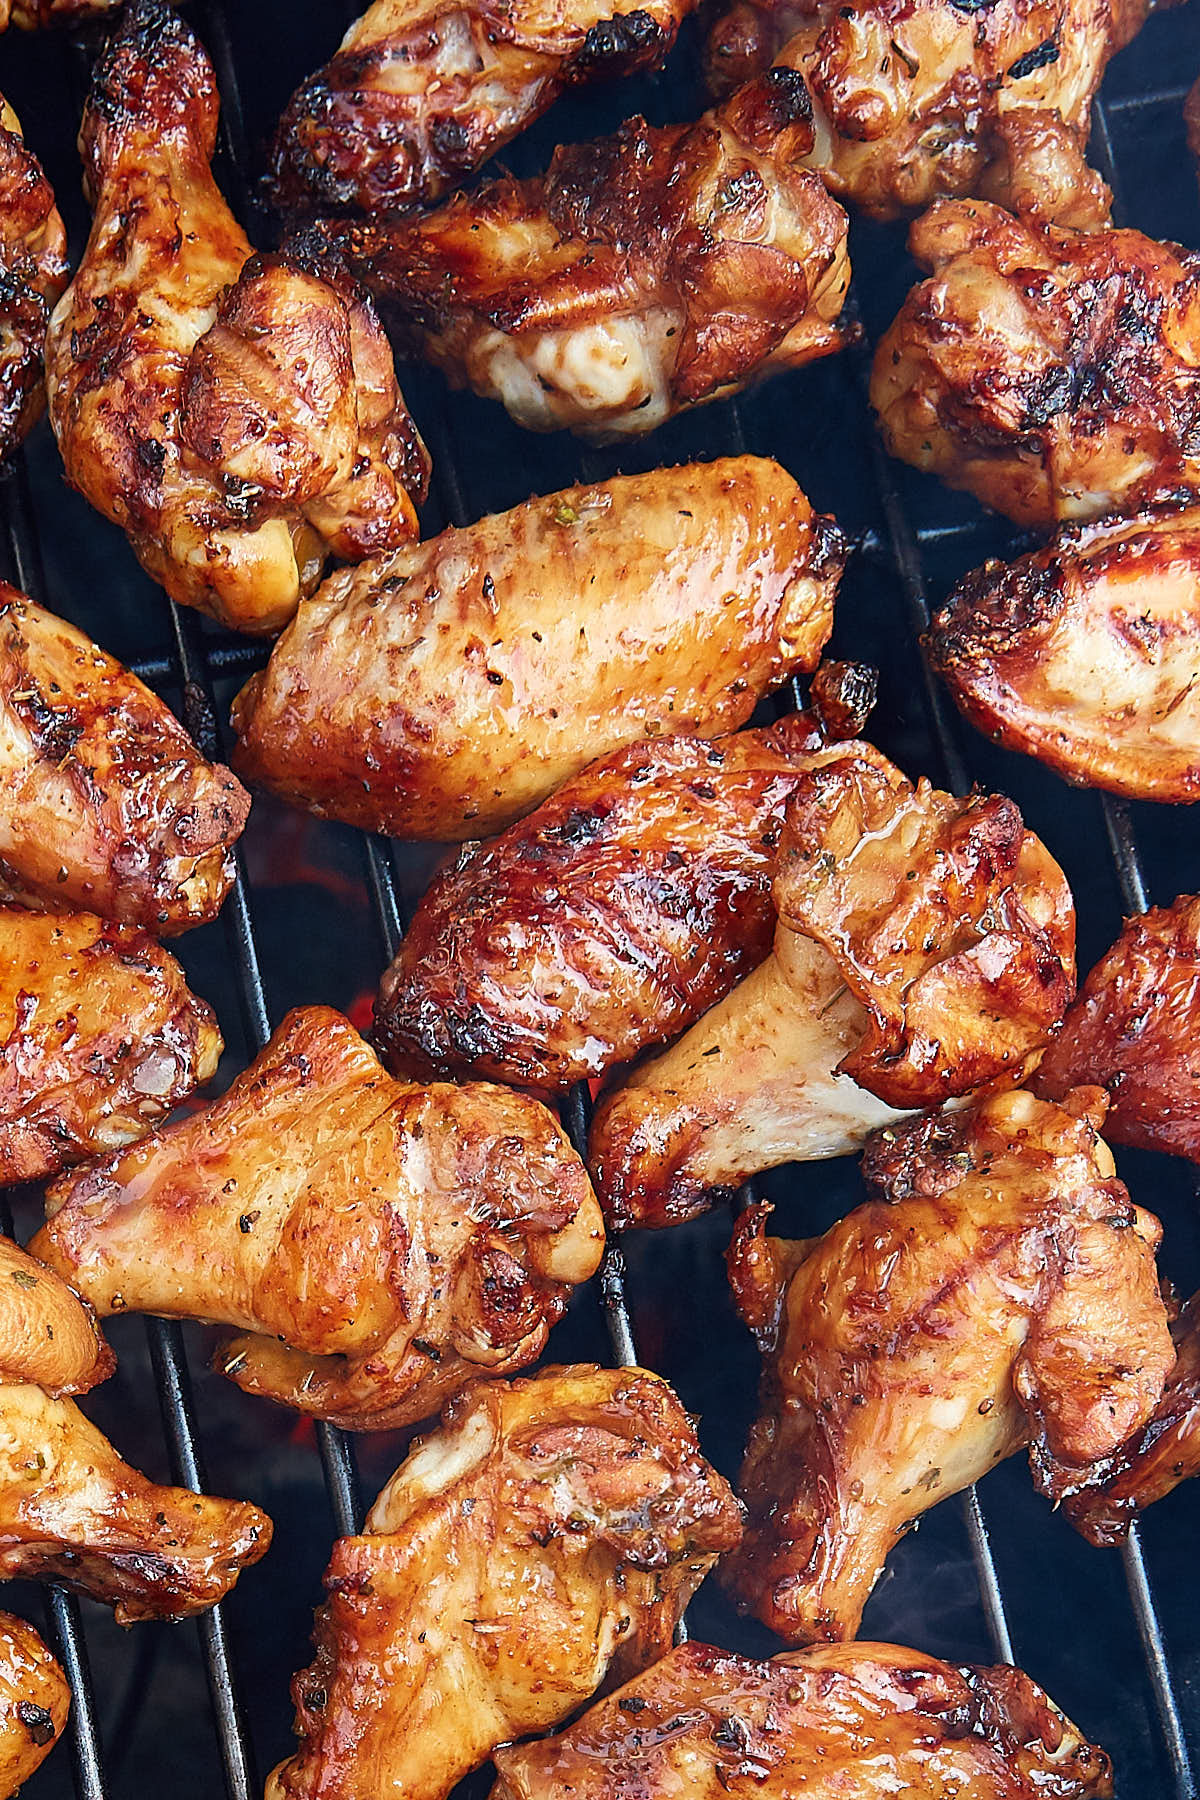 Cooking Chicken Wings On the Grill New Irresistible Grilled Chicken Wings Craving Tasty